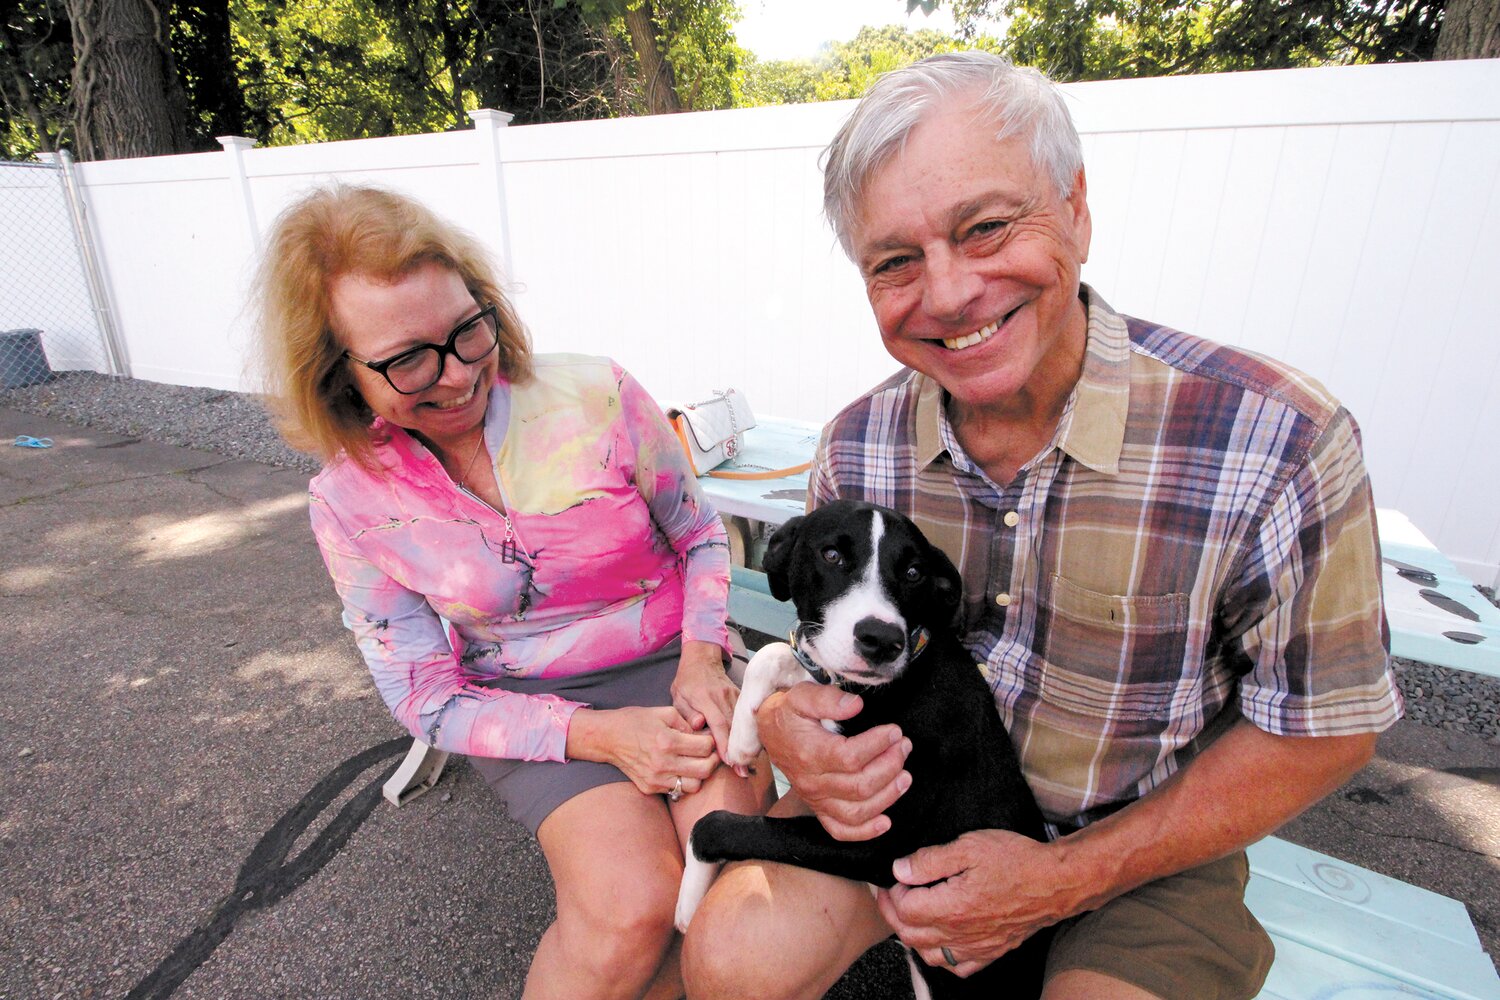 IT COULD BE A MATCH: Rick and Denise Dobras of Buttonwoods were thrilled to be introduced to Hayley last weekend at the EGAPL Center of Rhode Island Rescue in Cranston. Crowded animal shelters and what shelter personnel  face is explored in the This Side Up column on page 5. The Dobras’ are waiting to learn if their offer to adopt Hayley is accepted. (Warwick Beacon photo)